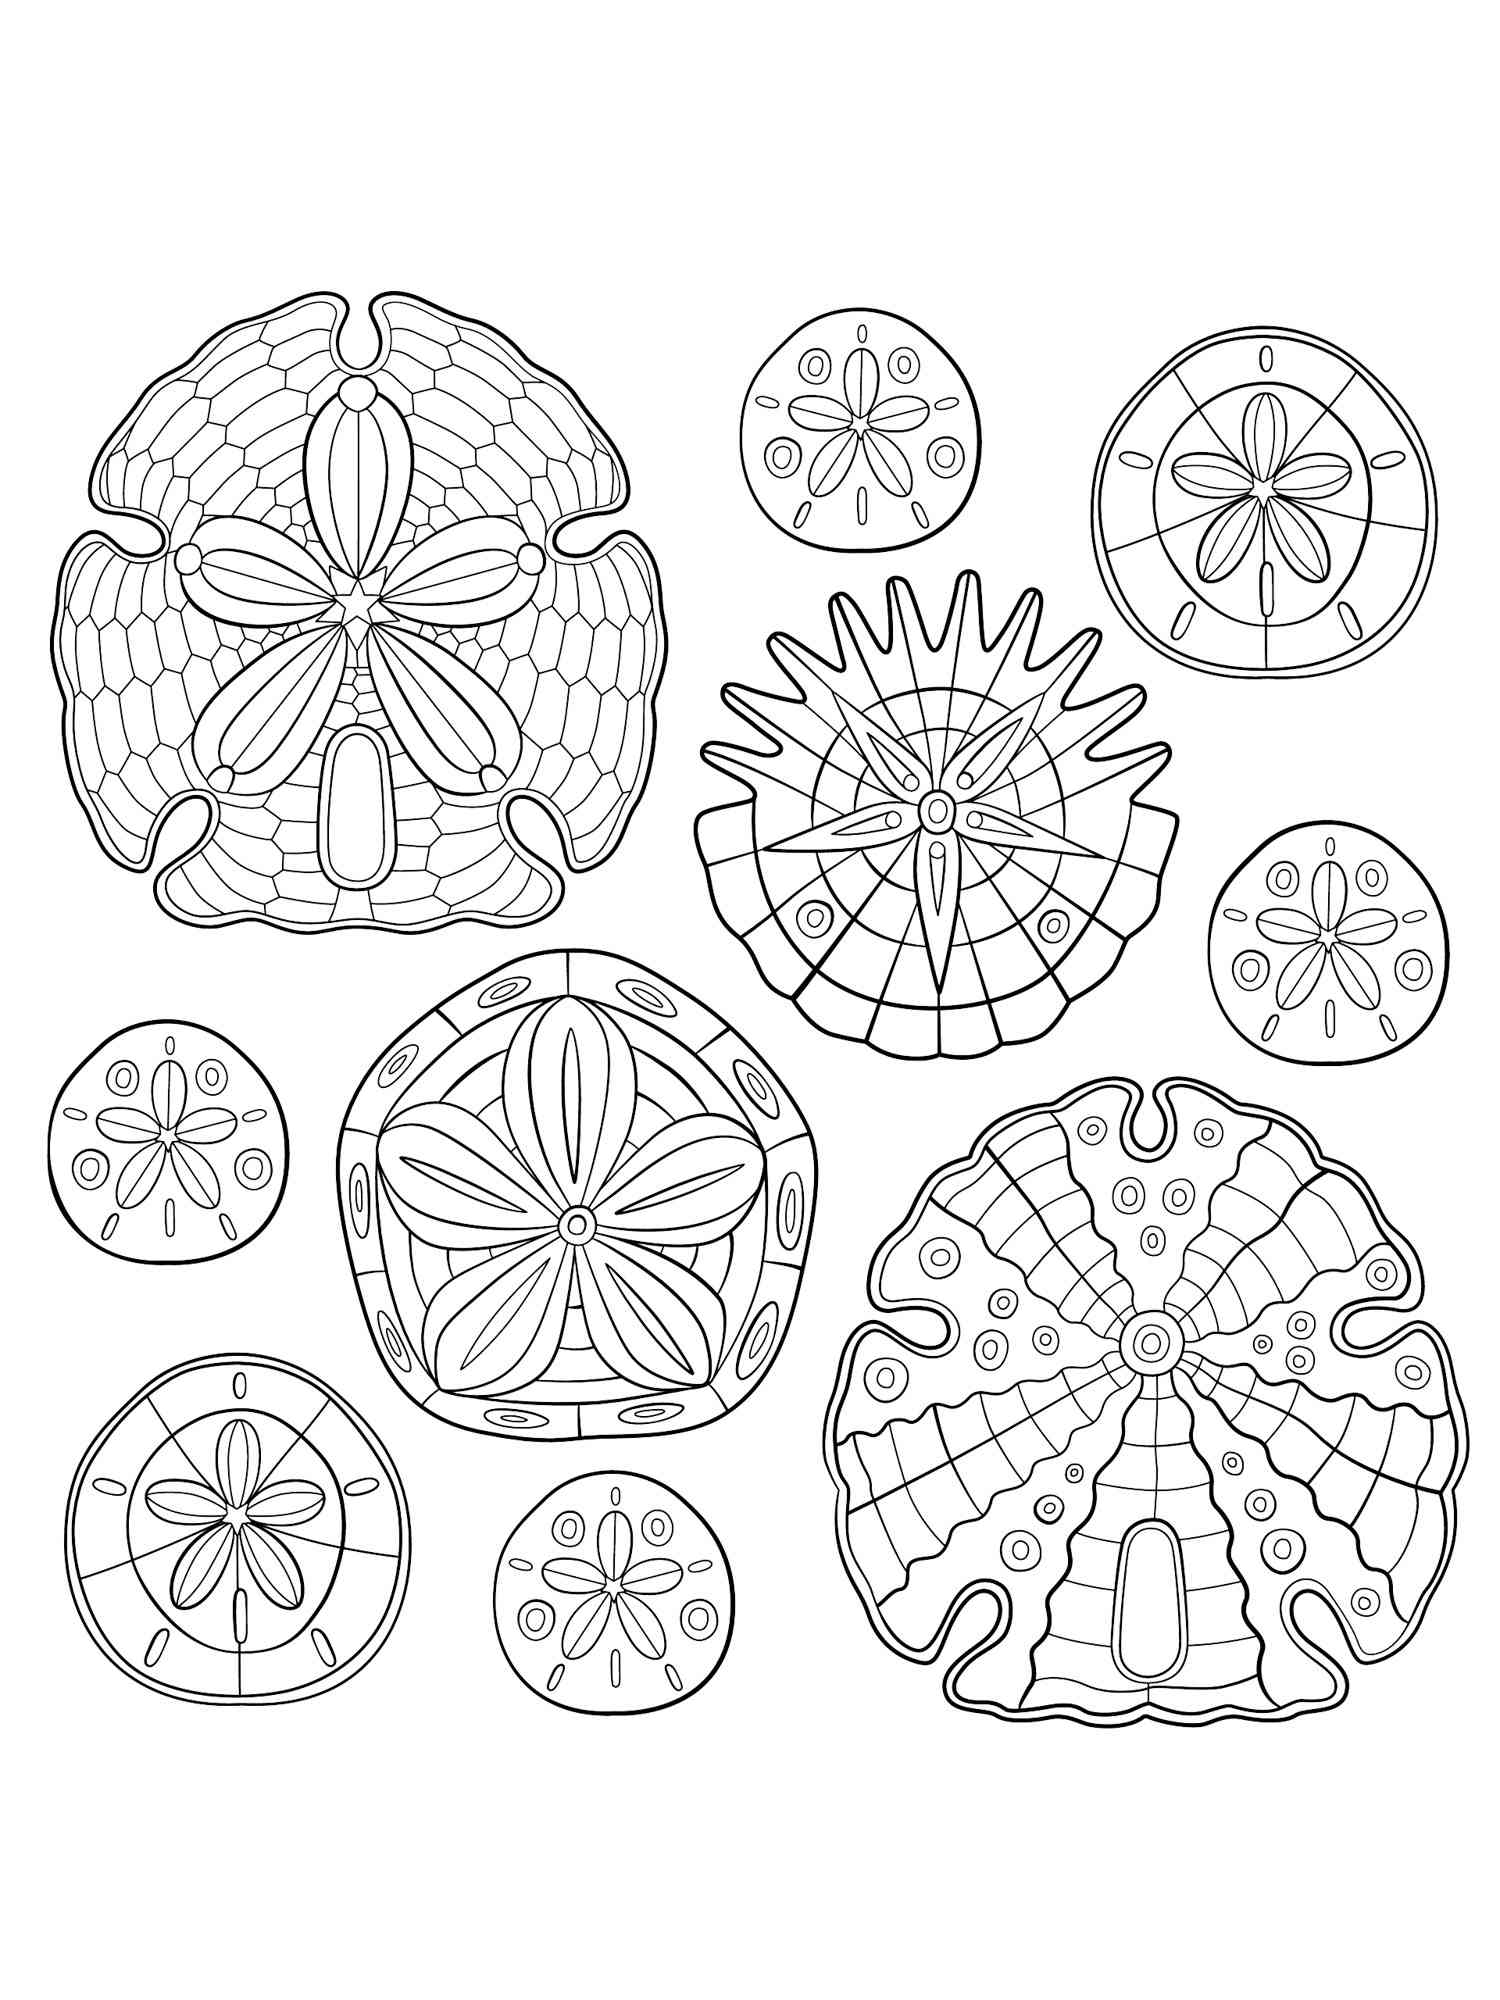 Sand Dollar Art coloring page